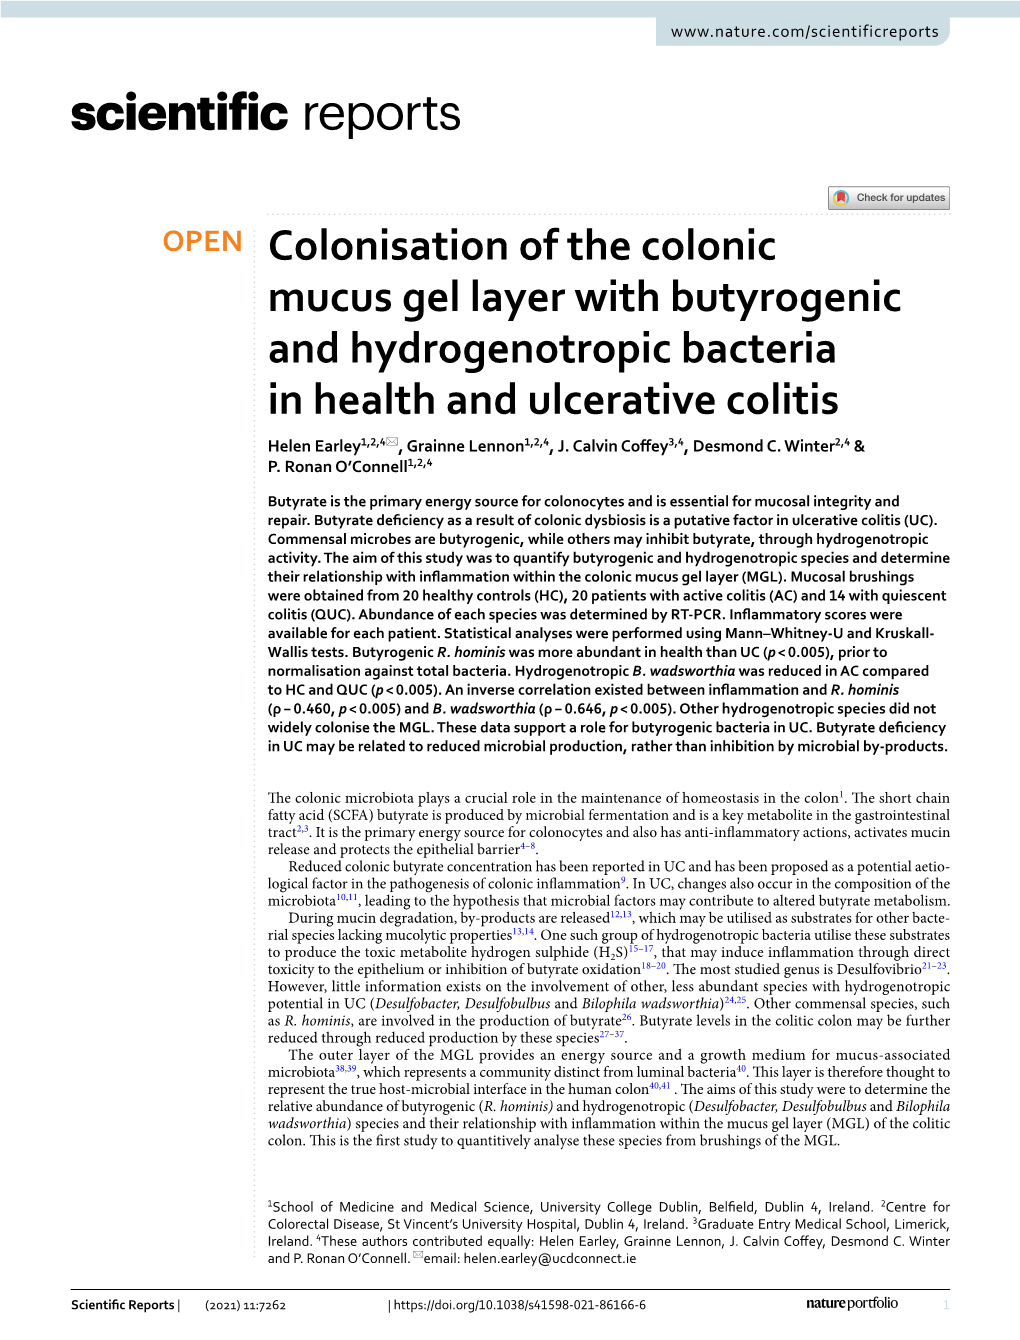 Colonisation of the Colonic Mucus Gel Layer with Butyrogenic and Hydrogenotropic Bacteria in Health and Ulcerative Colitis Helen Earley1,2,4*, Grainne Lennon1,2,4, J